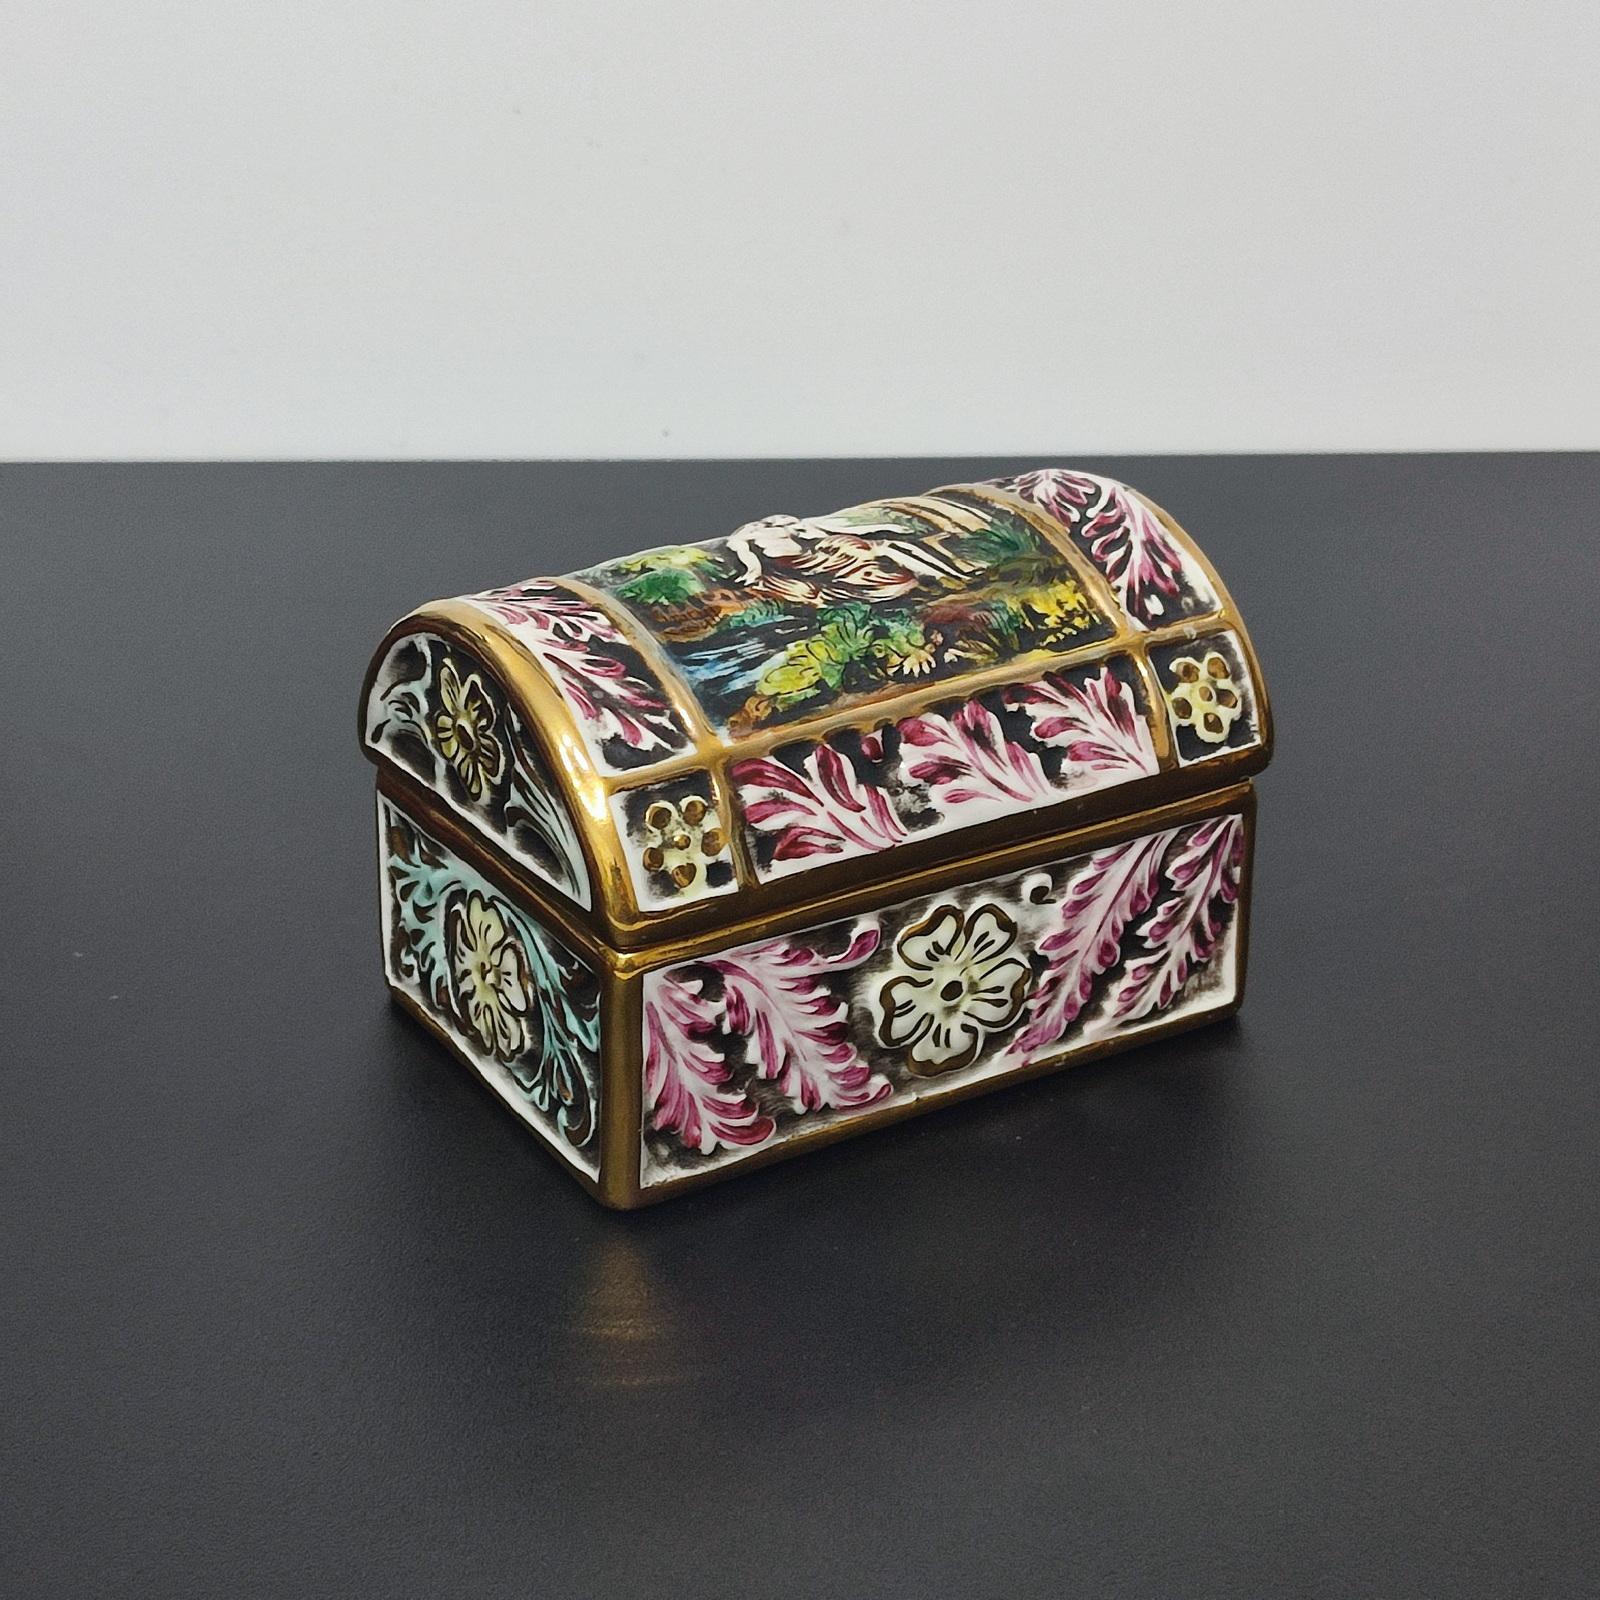 Capodimonte Porcelain Chest, Jewelry Box, Italy Mid 20th Century - FREE SHIPPING For Sale 4